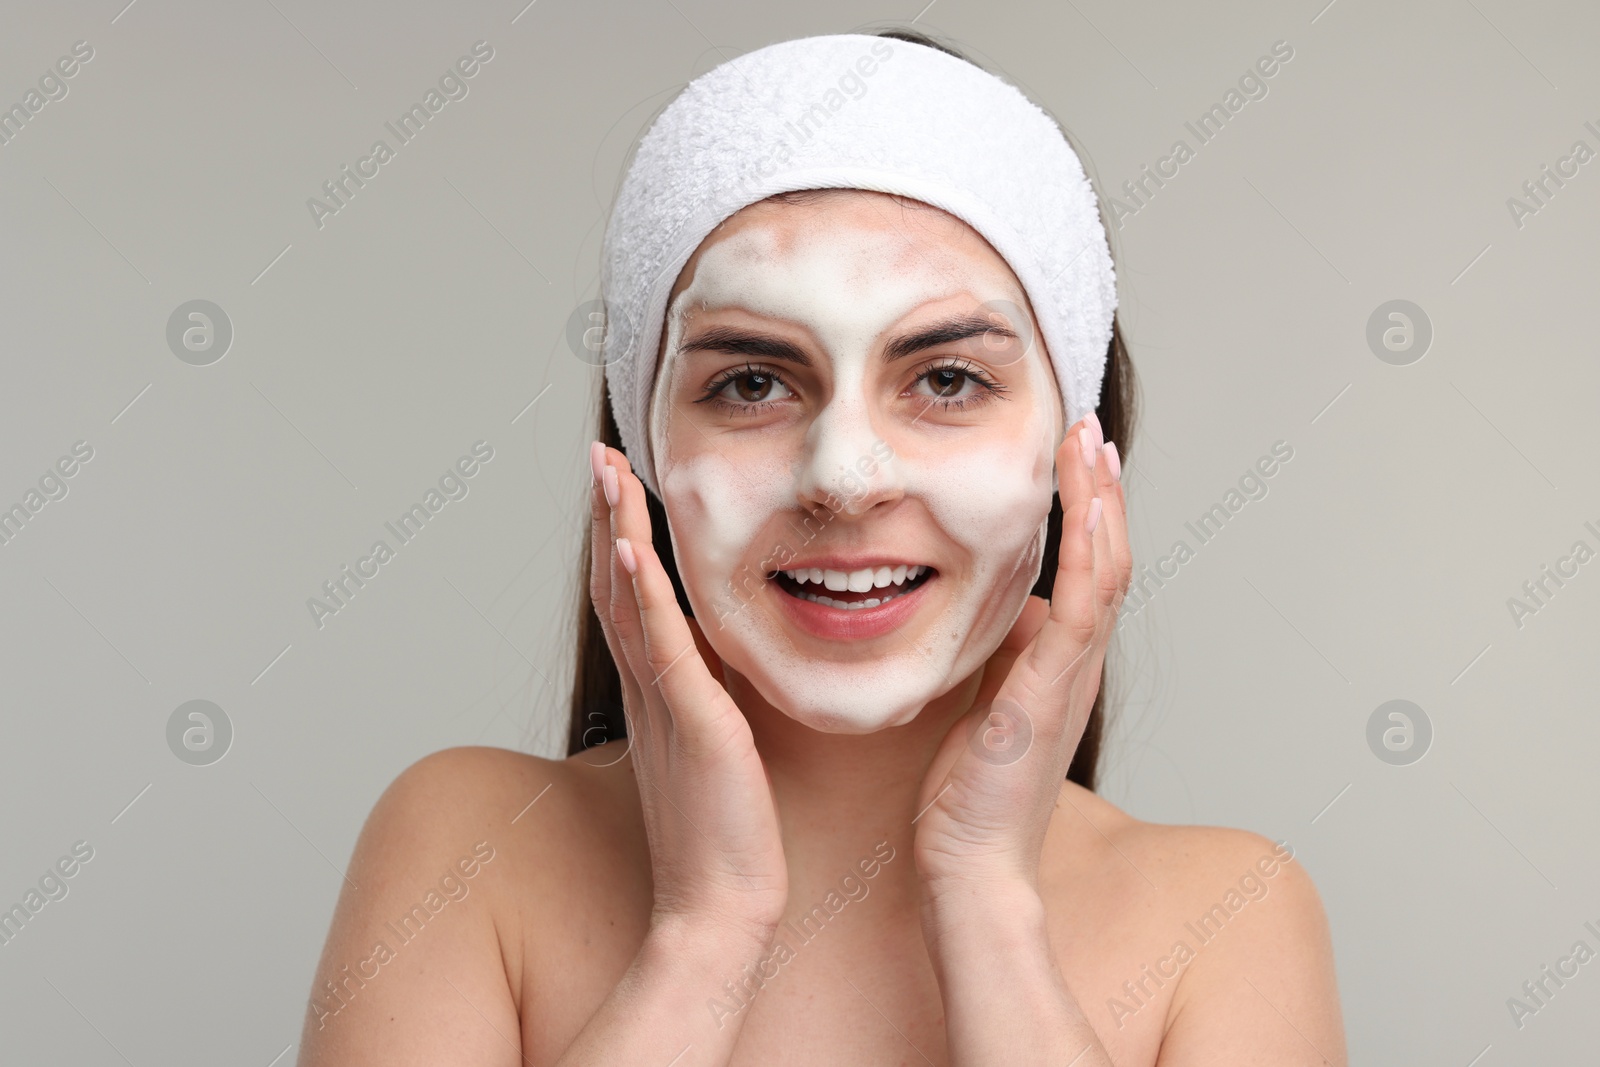 Photo of Young woman with headband washing her face on light grey background